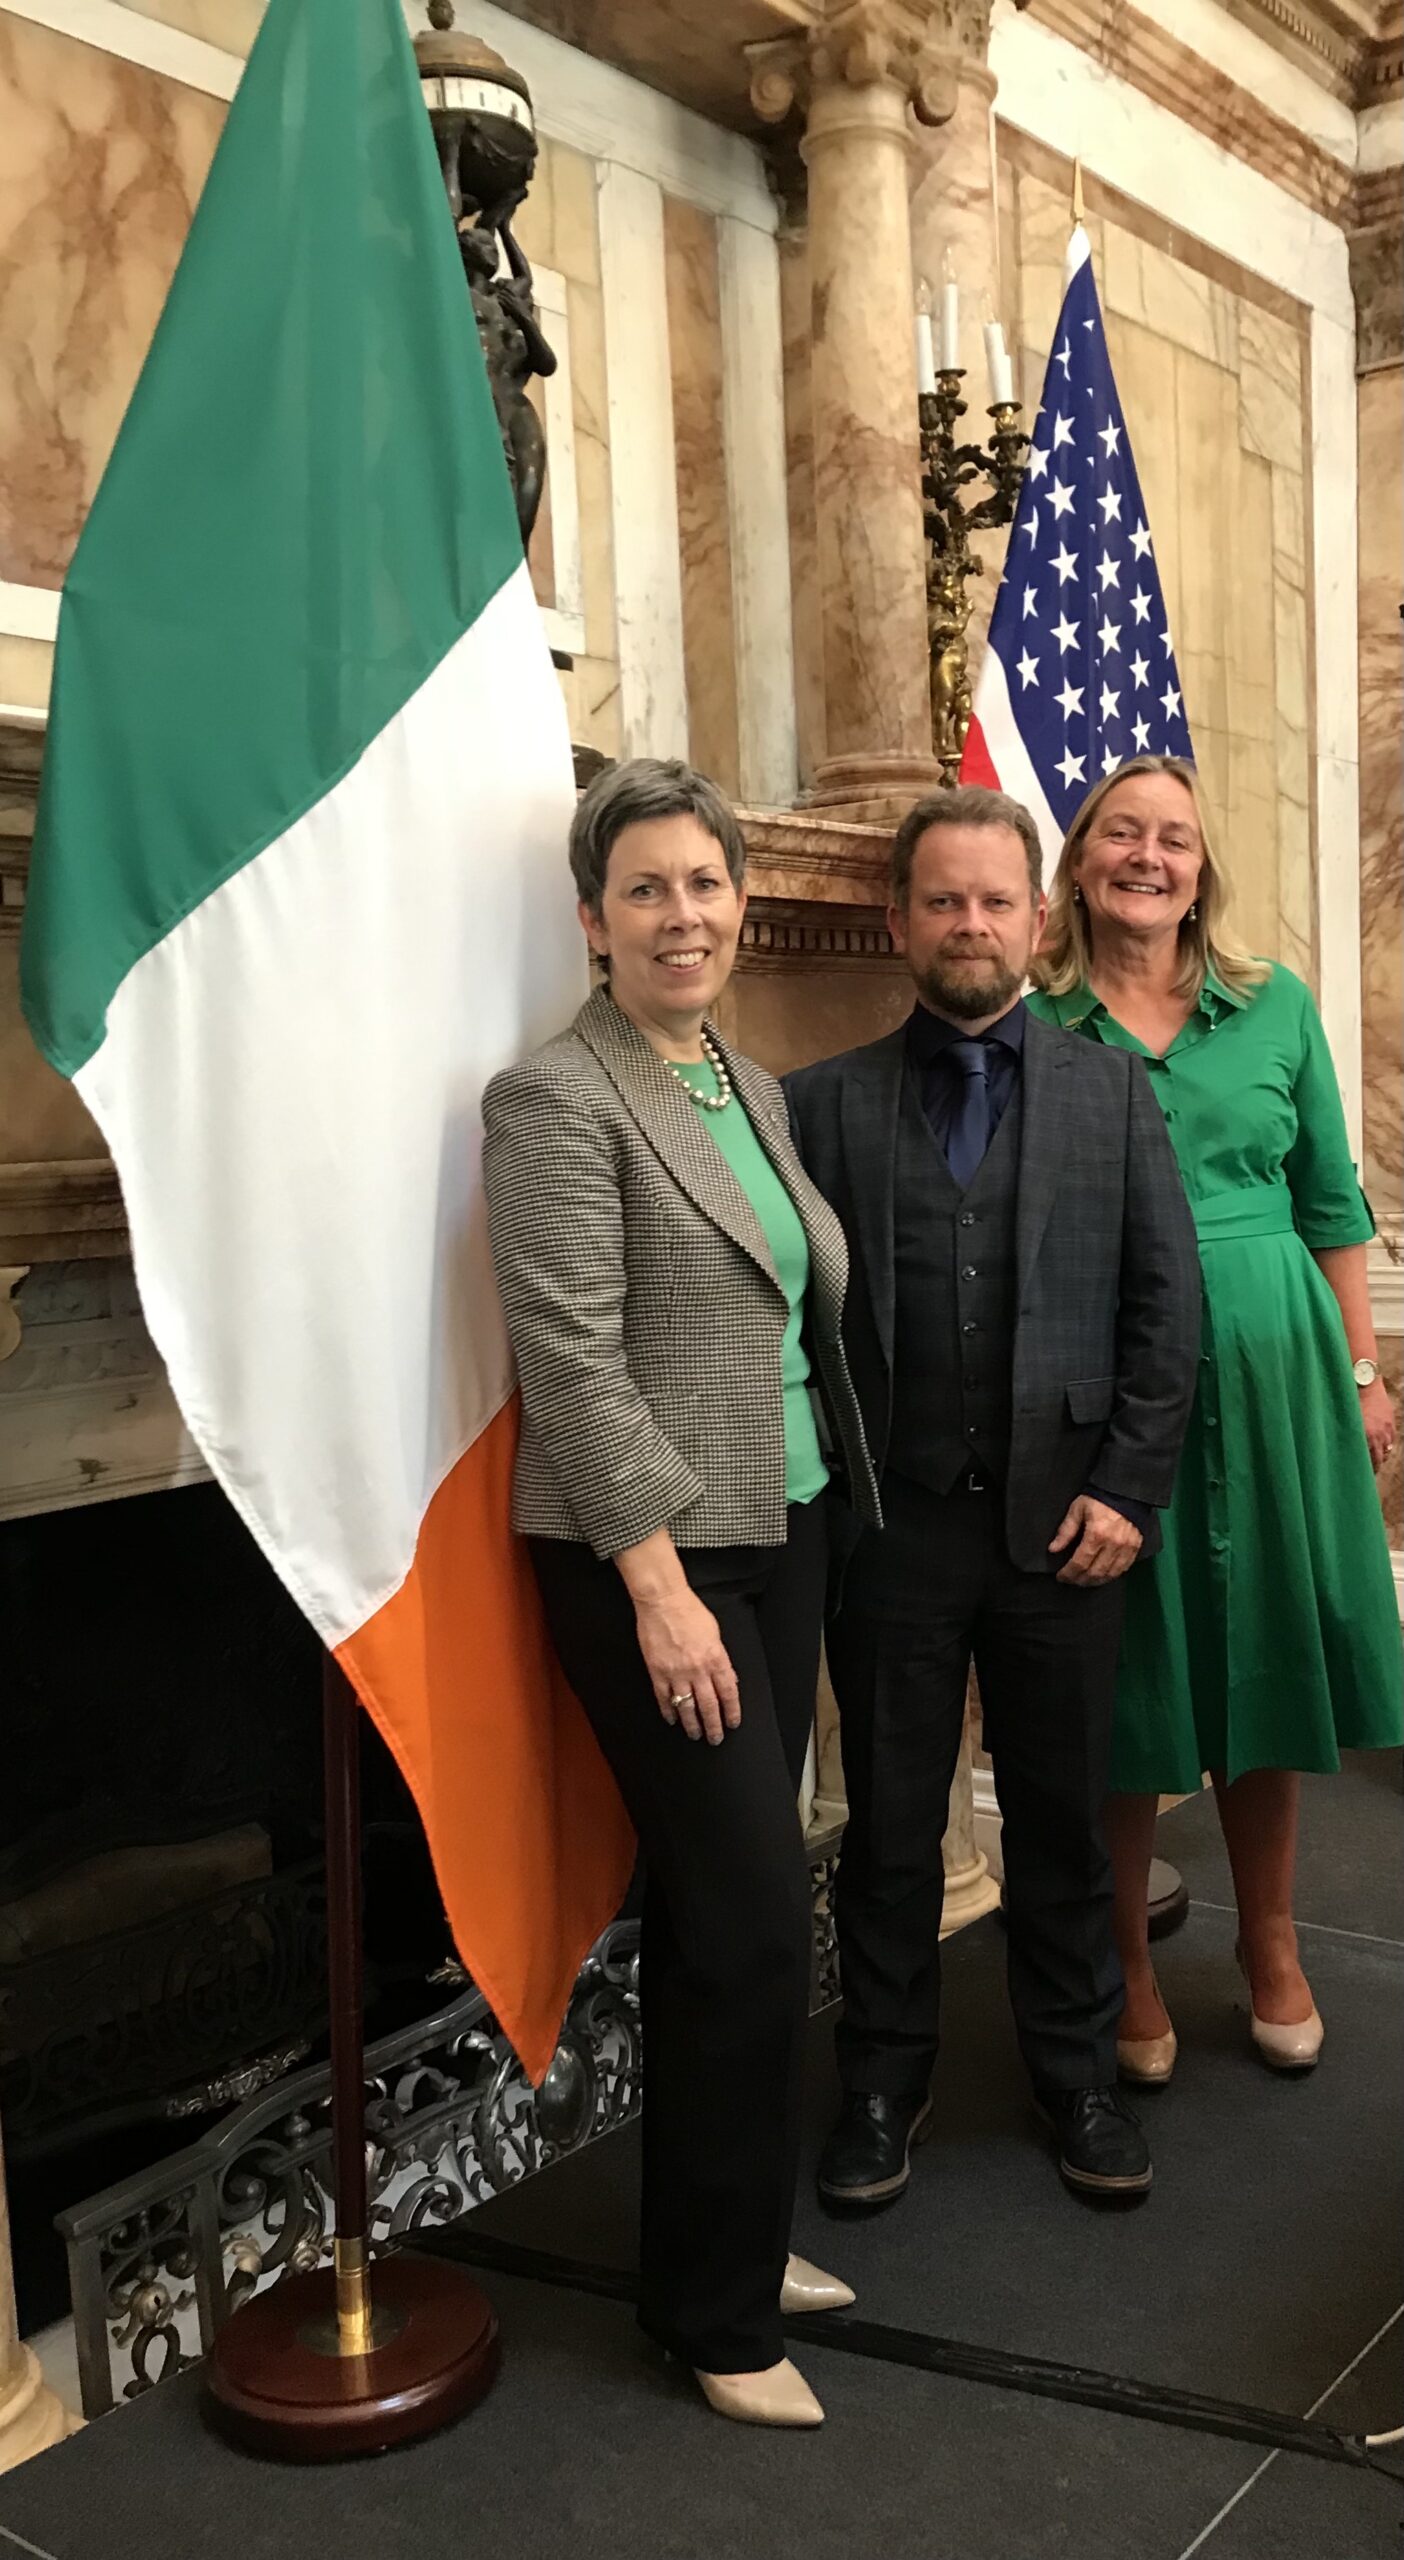 Pictured left to right: ATU President Dr Orla Flynn; Executive Director of the Fulbright Commission in Ireland Dr Dara Fitzgerald; Fulbright Campus Ambassador Dr Rita Melia at the 2022-2023 Fulbright awards ceremony in Iveagh House Dublin in June 2022.